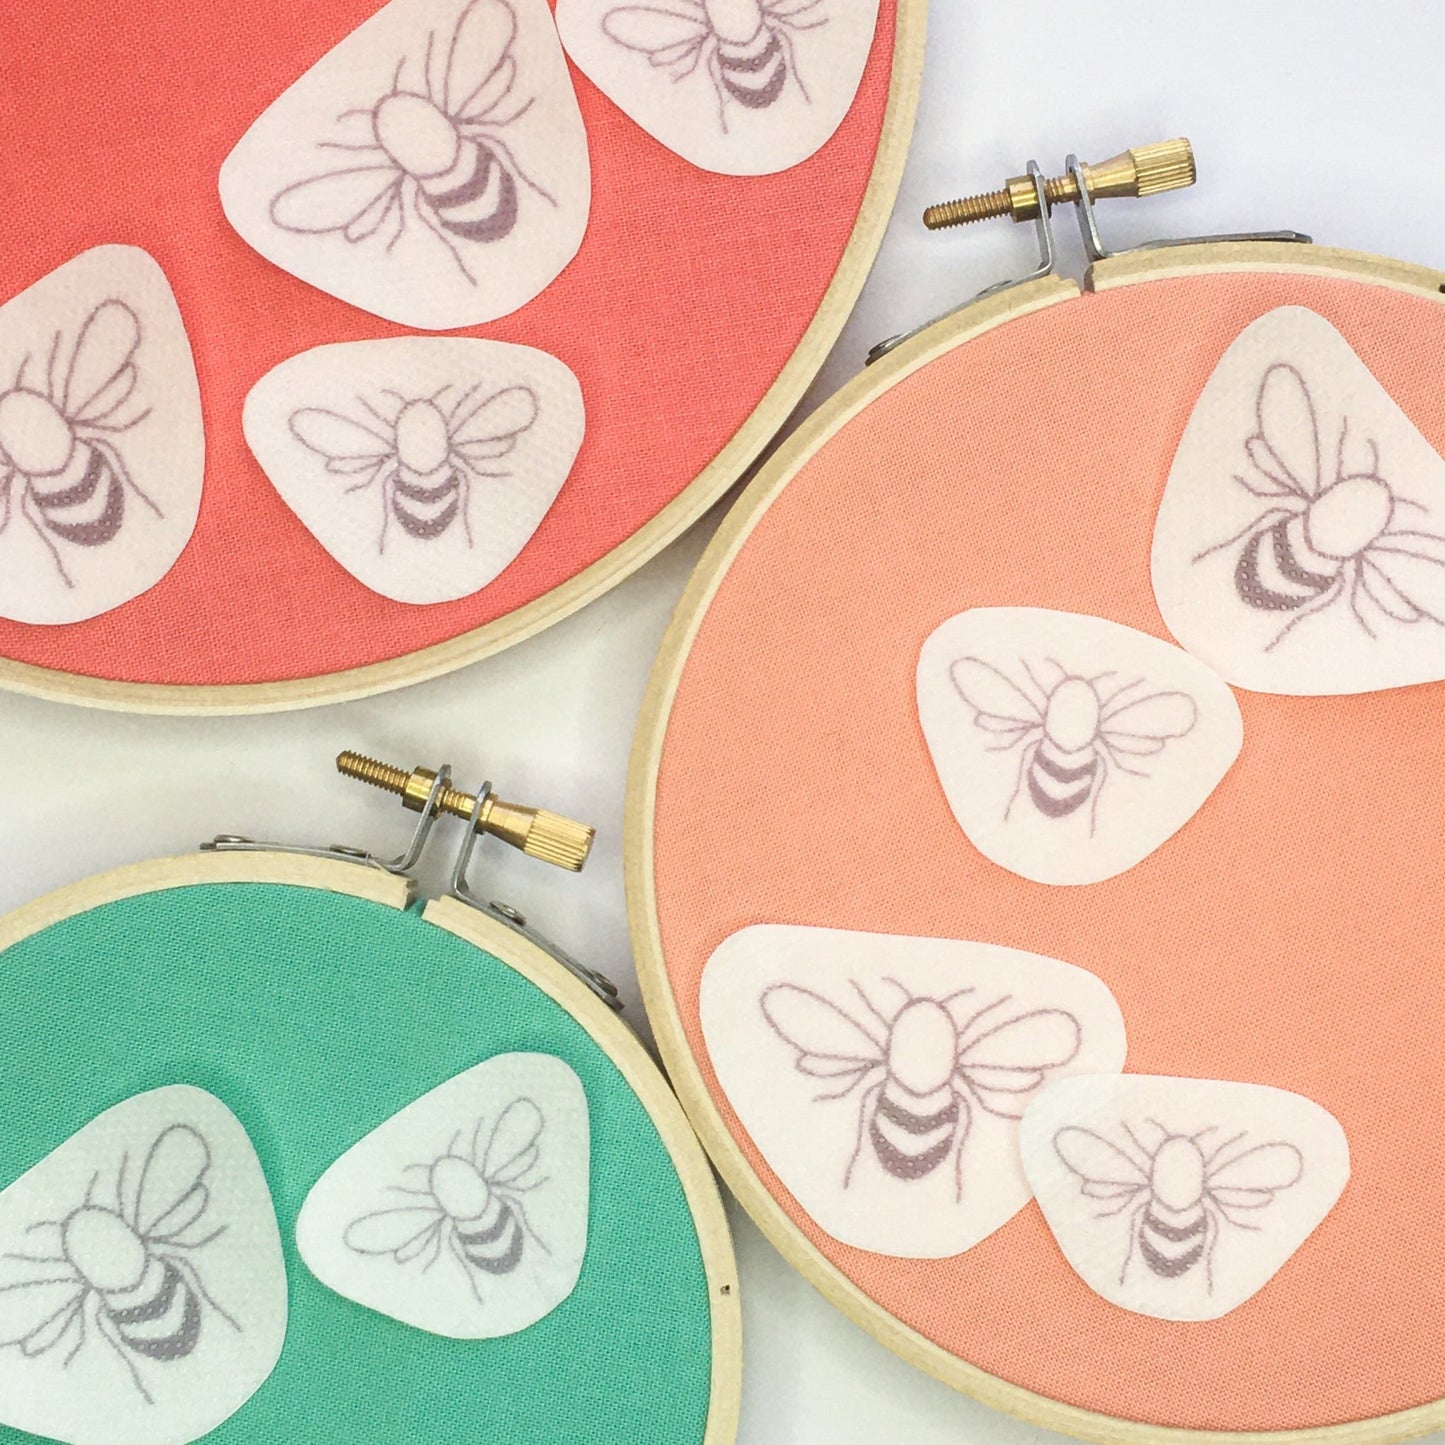 Bees Stick and Stitch Embroidery Designs - Craft Make Do